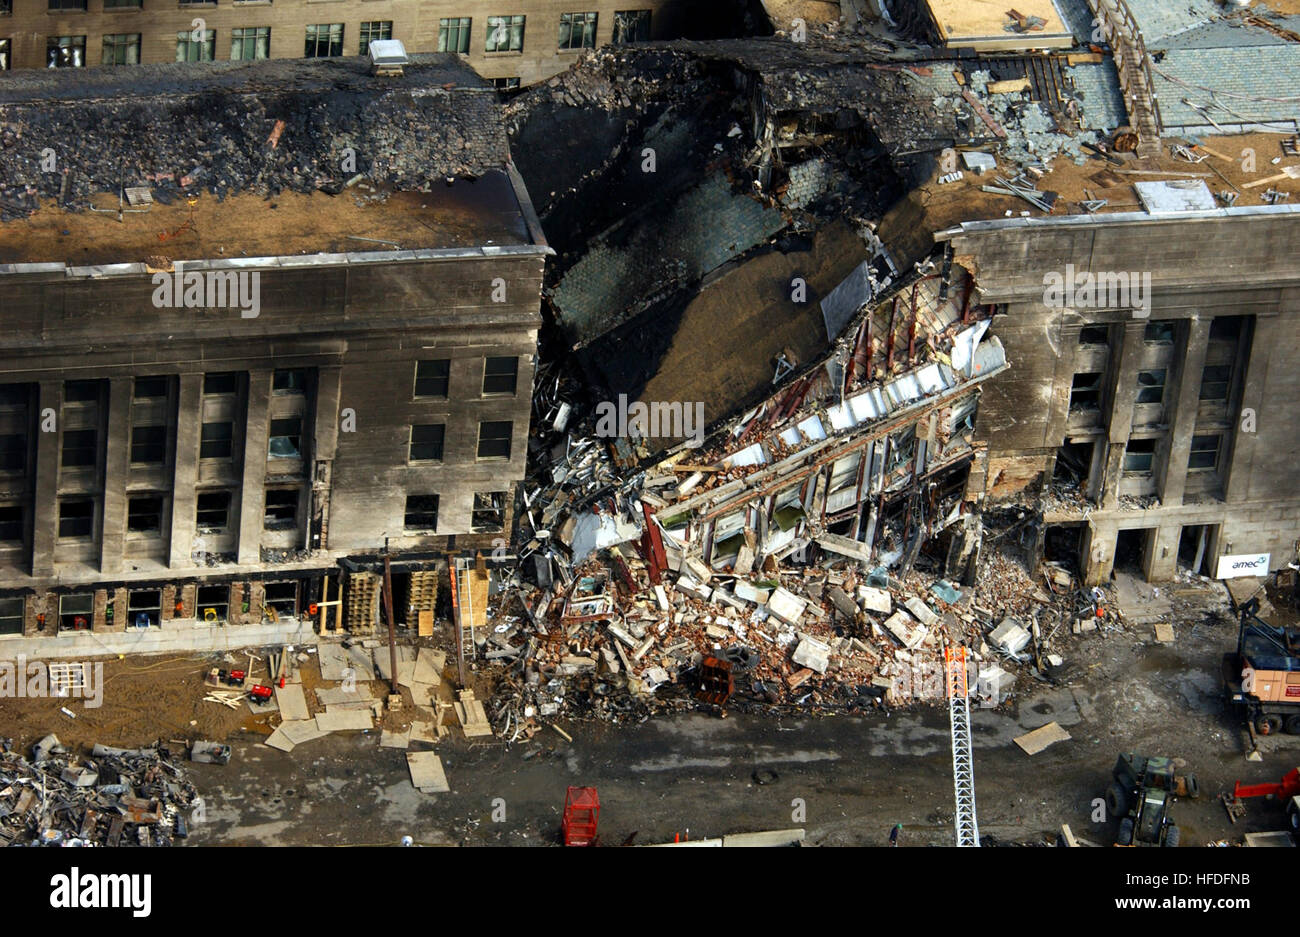 010914-F-8006R-001  This aerial photograph shot on Sept. 14, 2001, shows some of the destruction caused when the high-jacked American Airlines flight slammed into the Pentagon on Sept. 11.  The terrorist attack caused extensive damage to the west face of the building and followed similar attacks on the twin towers of the World Trade Center in New York City.   DoD photograph by Tech. Sgt. Cedric H. Rudisill.  (Released) US Navy 010914-F-8006R-001 aerial view of Pentagon destruction Stock Photo